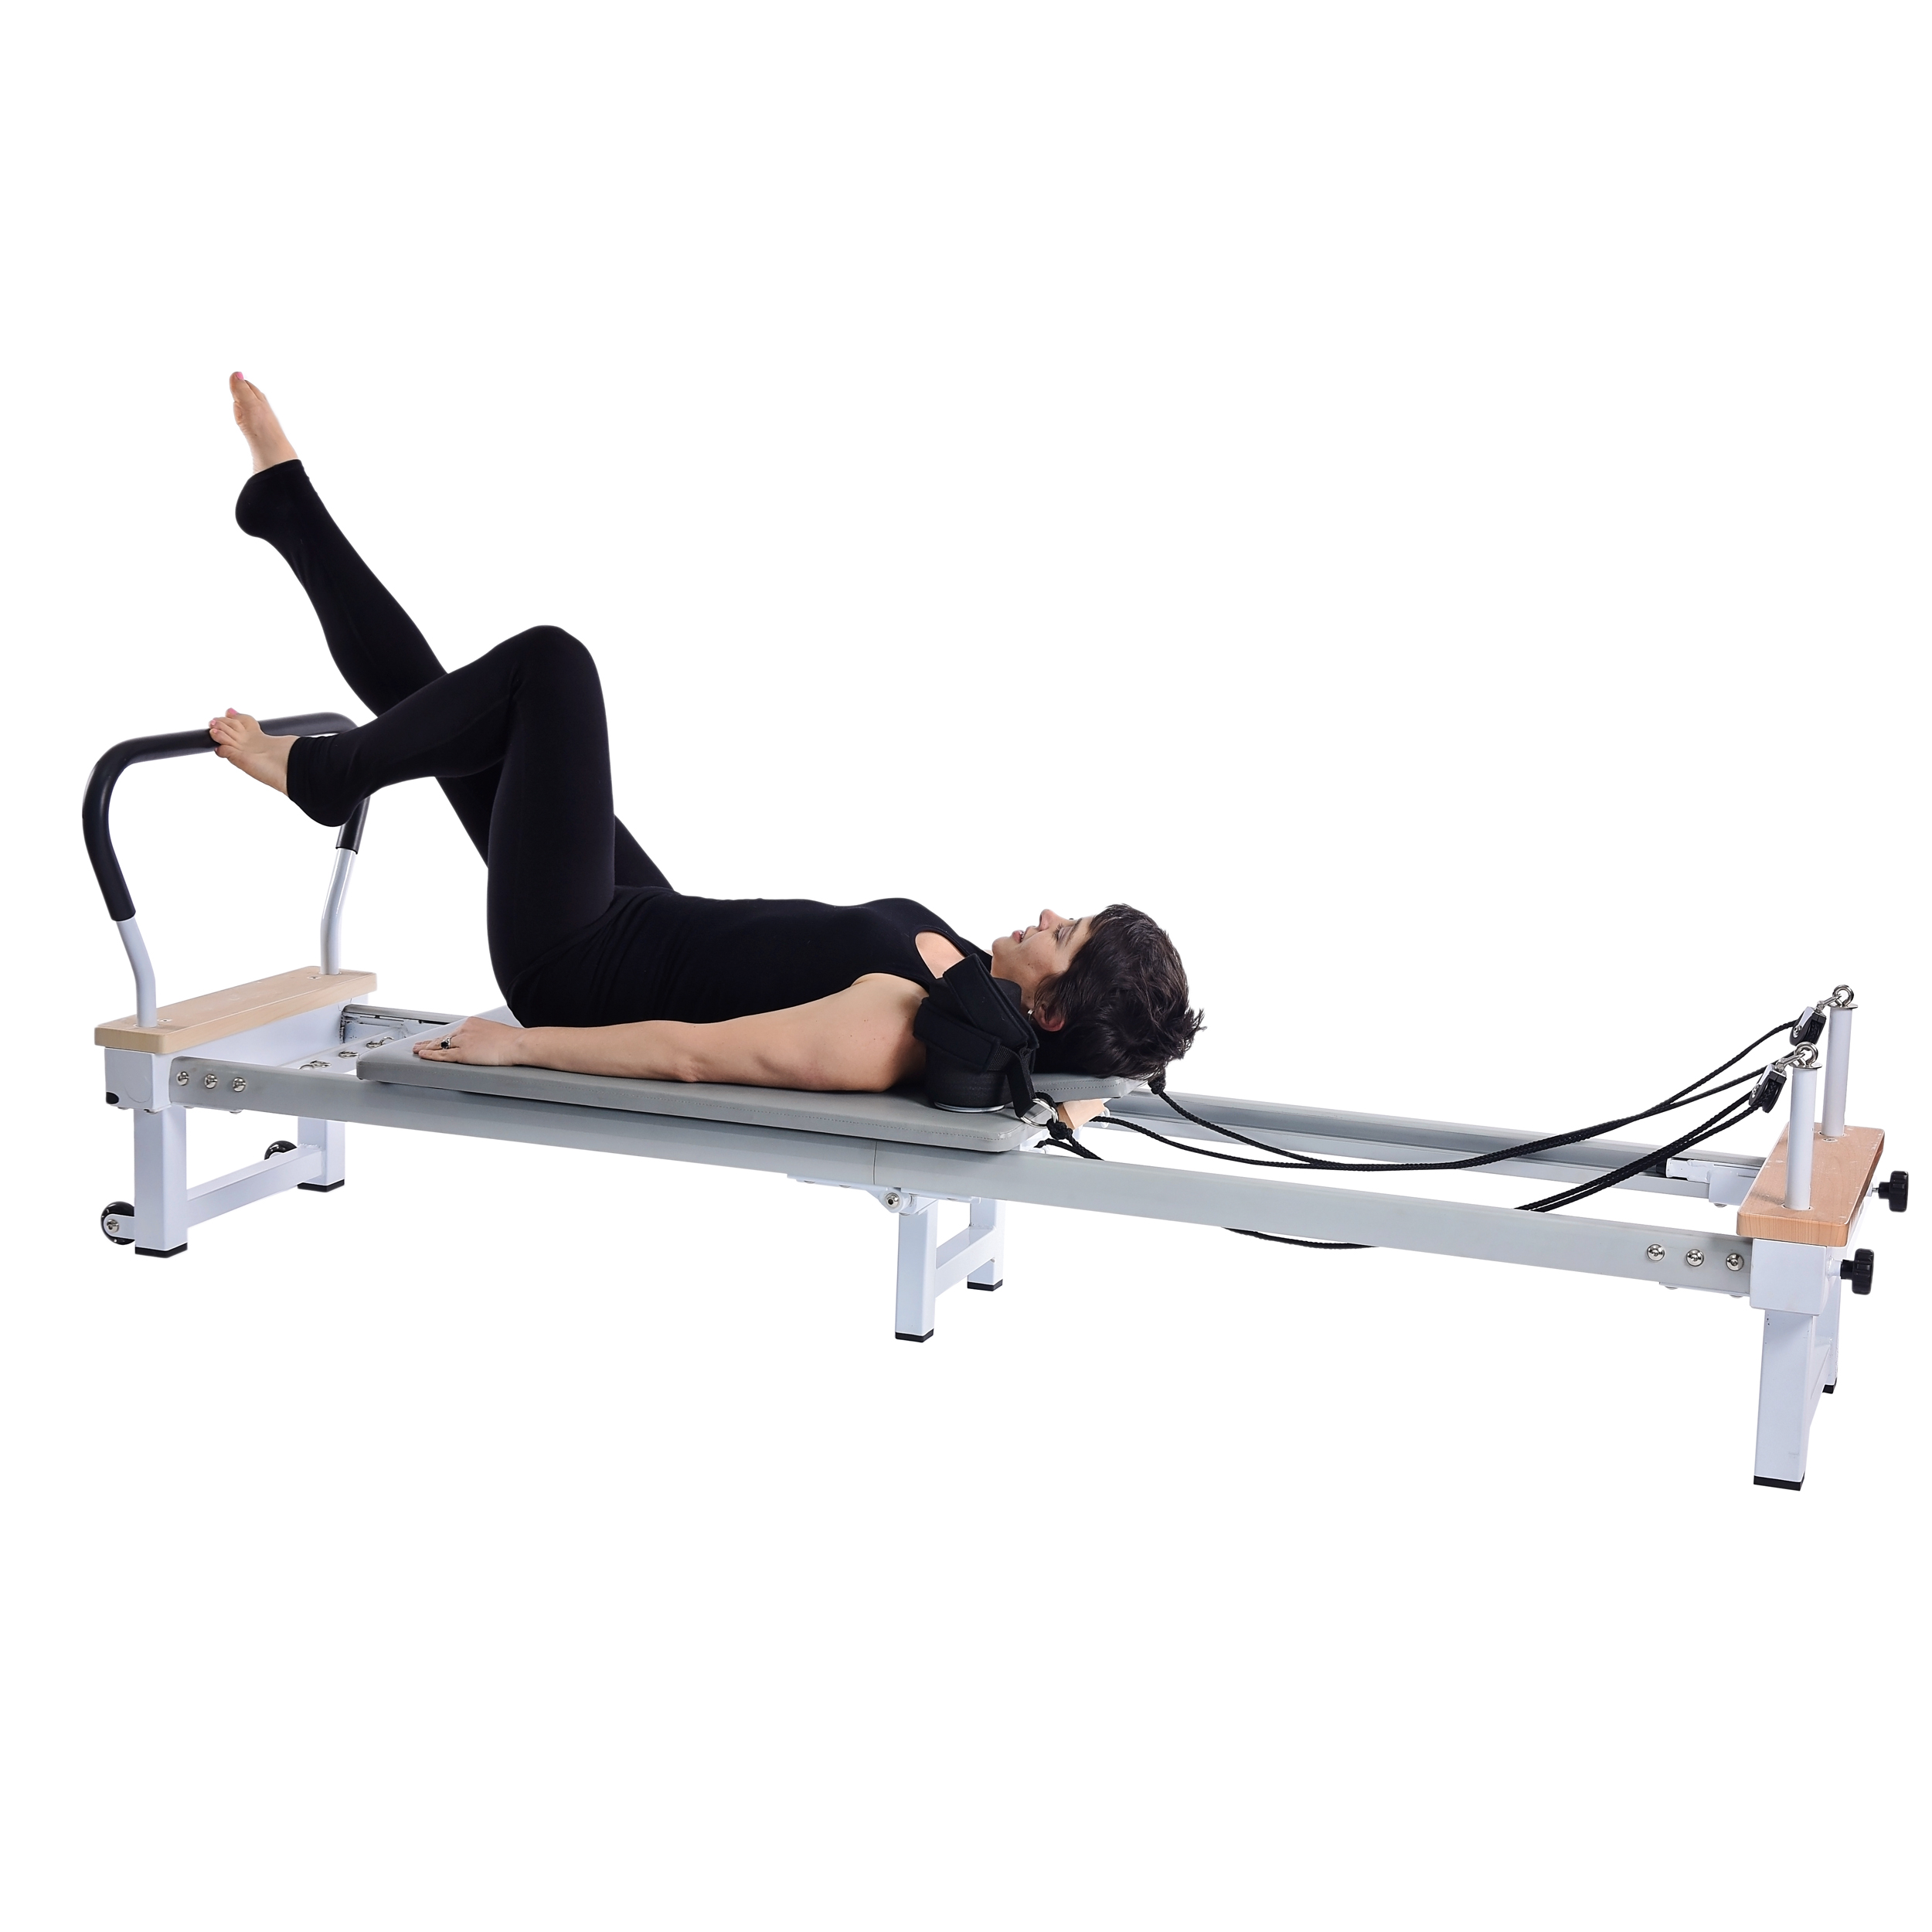 Premium Photo  Woman in workout clothes adjusting reformer pilates bed